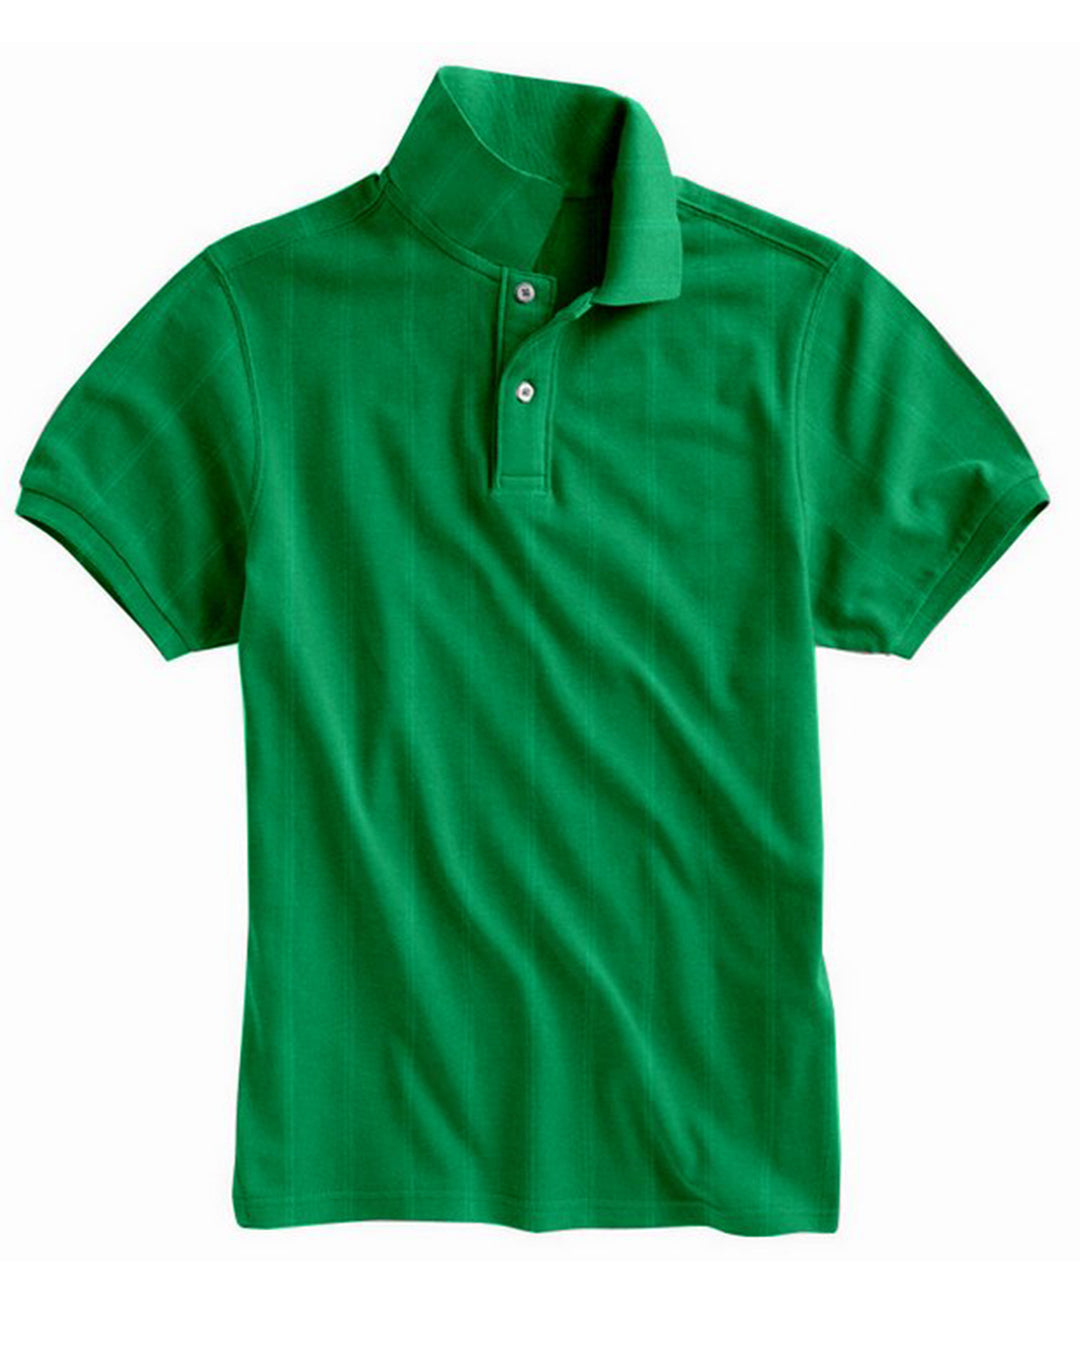 Green With Self Stripes T-shirt